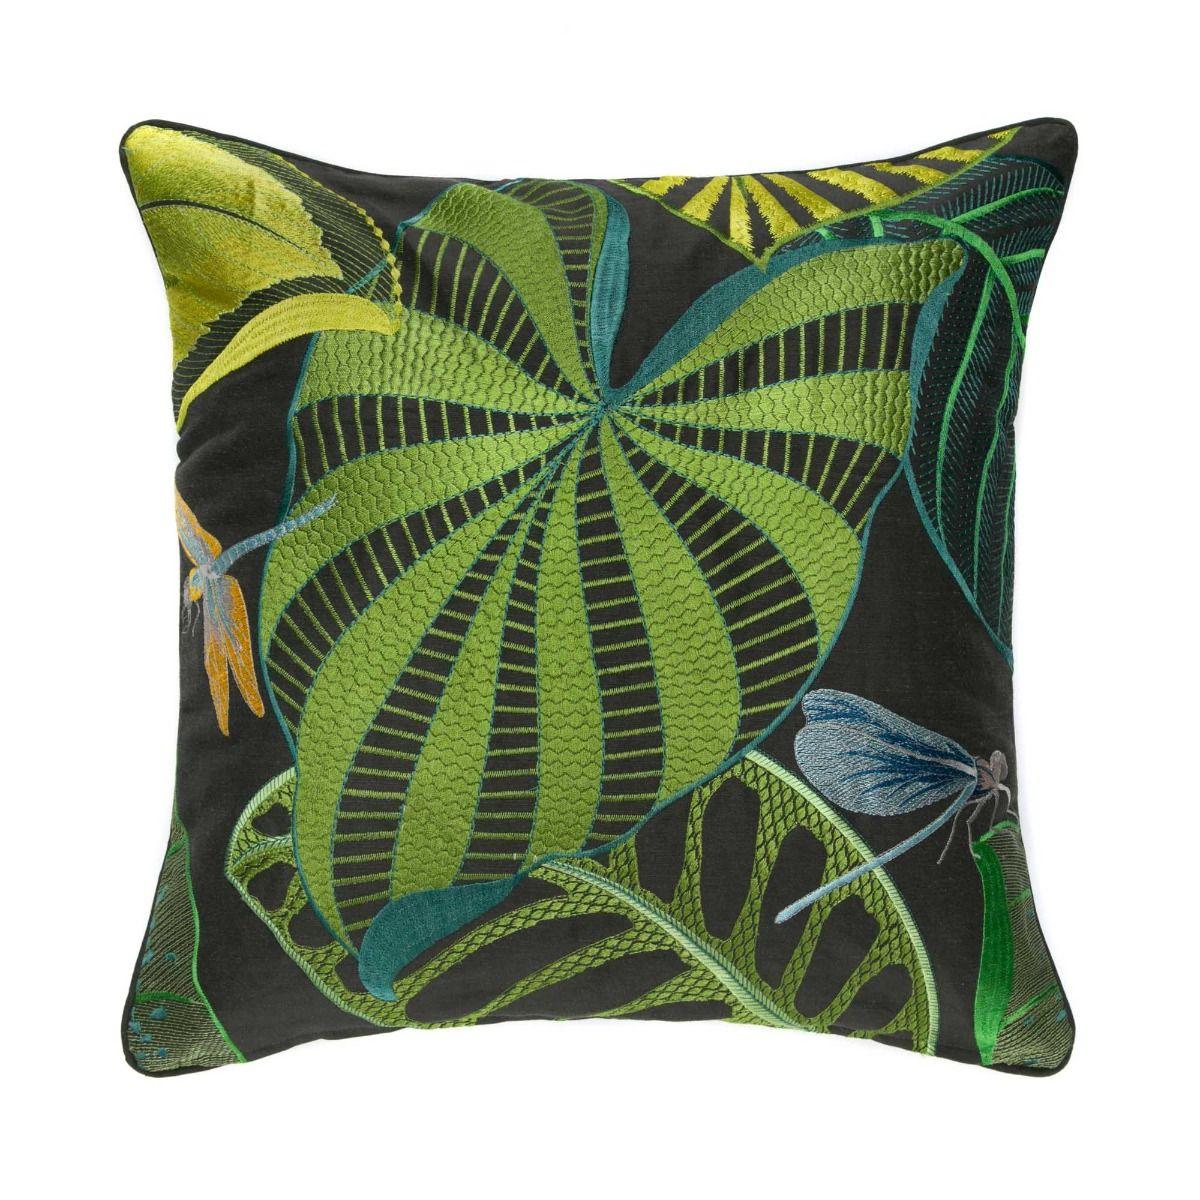 Jungle Vibe Embroidered Cushion Cover 18" - Black